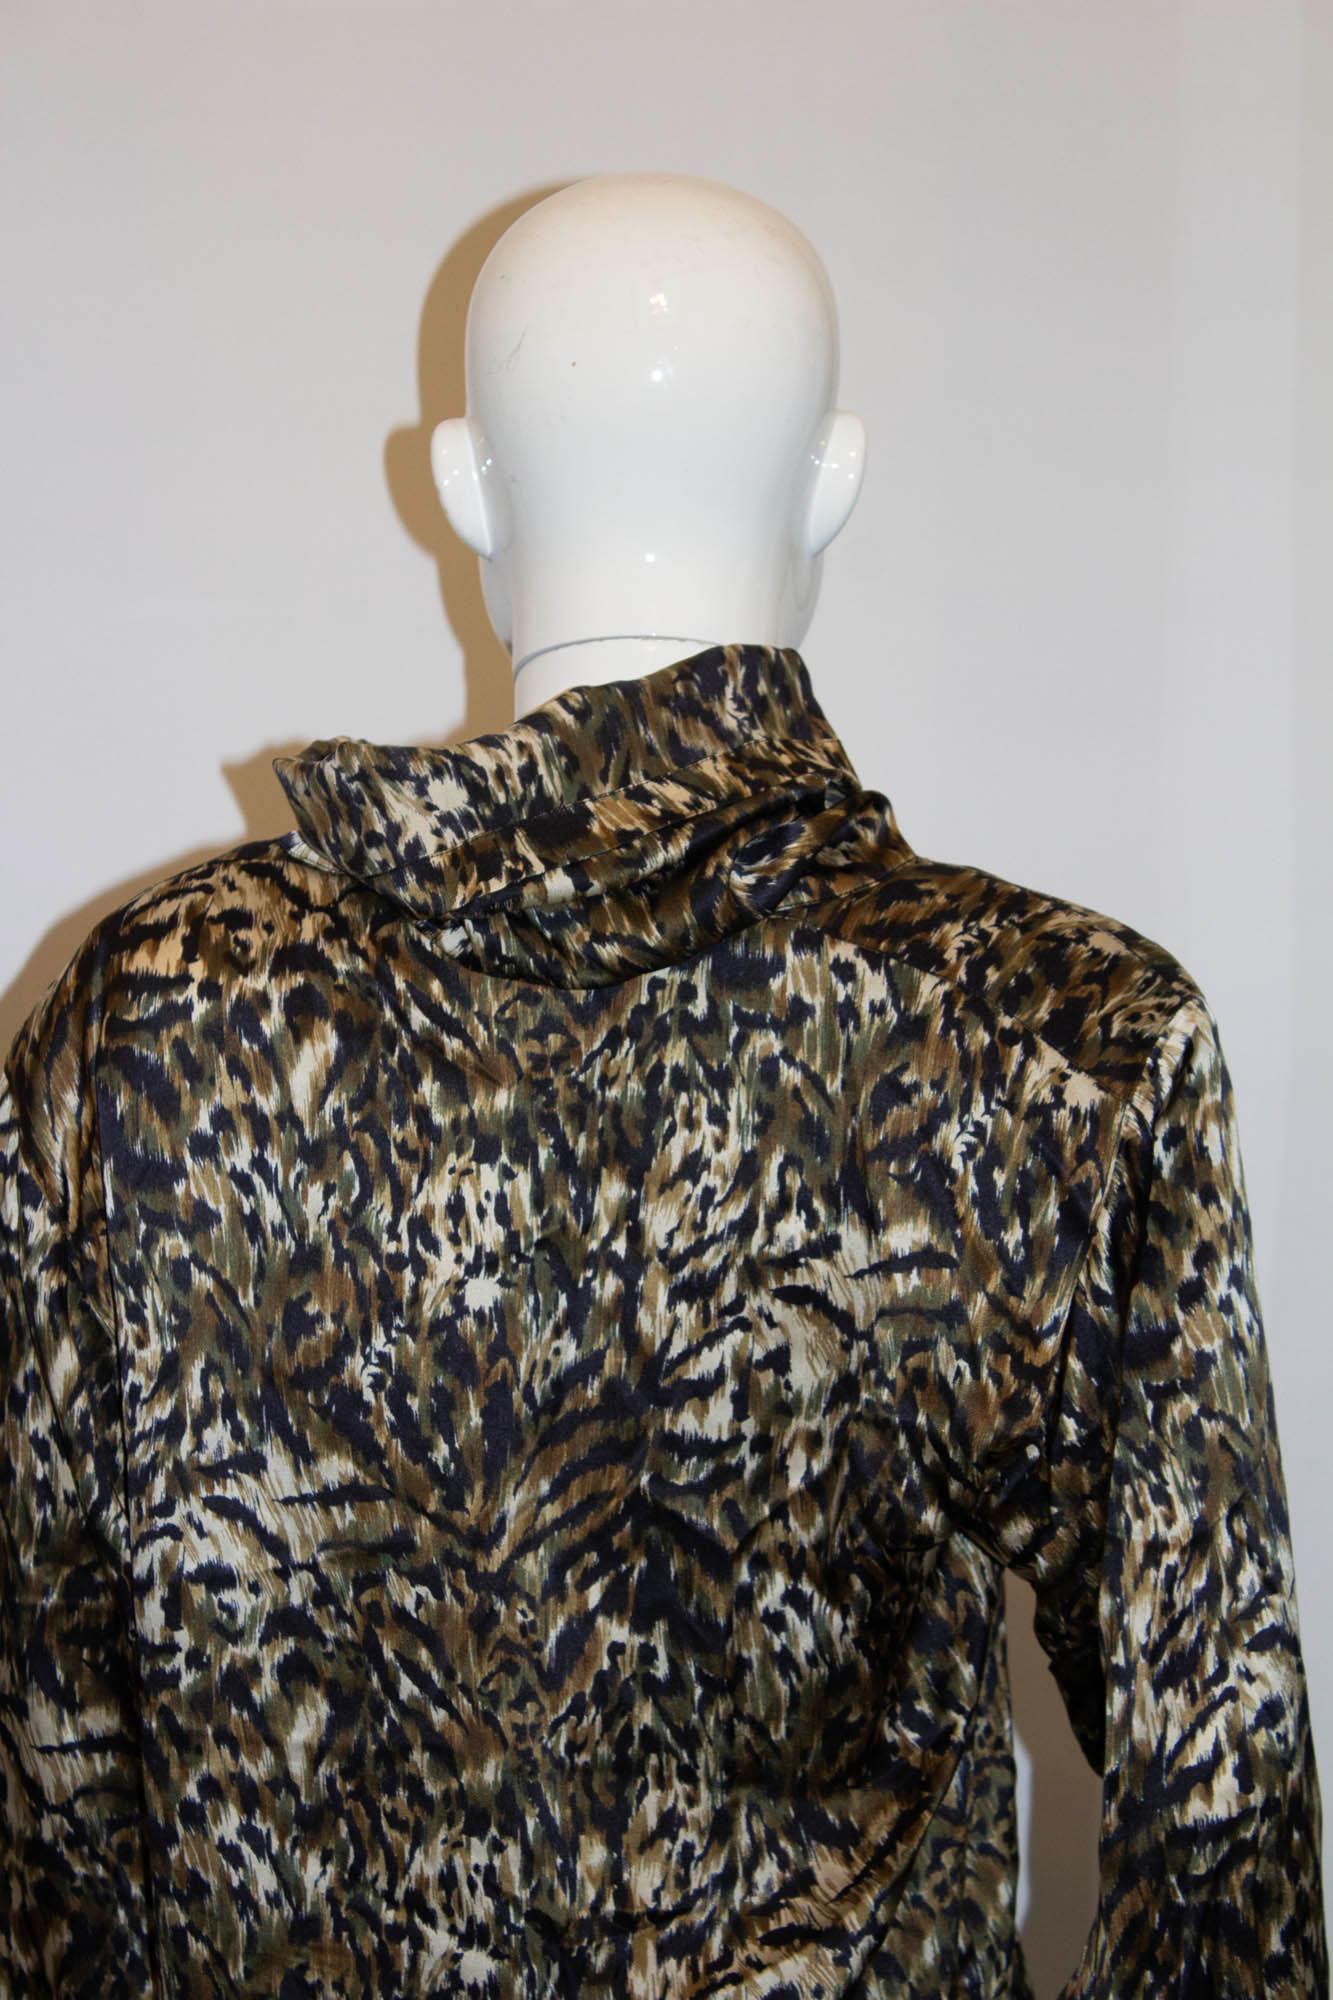 A chic vintage silk blouse by Genny. In an olive green, black and khaki mix, it has 4 '' slits on either side, and a cowl neck. Best worn loose fitting. Measurements: Bust up to 42'', length 24''